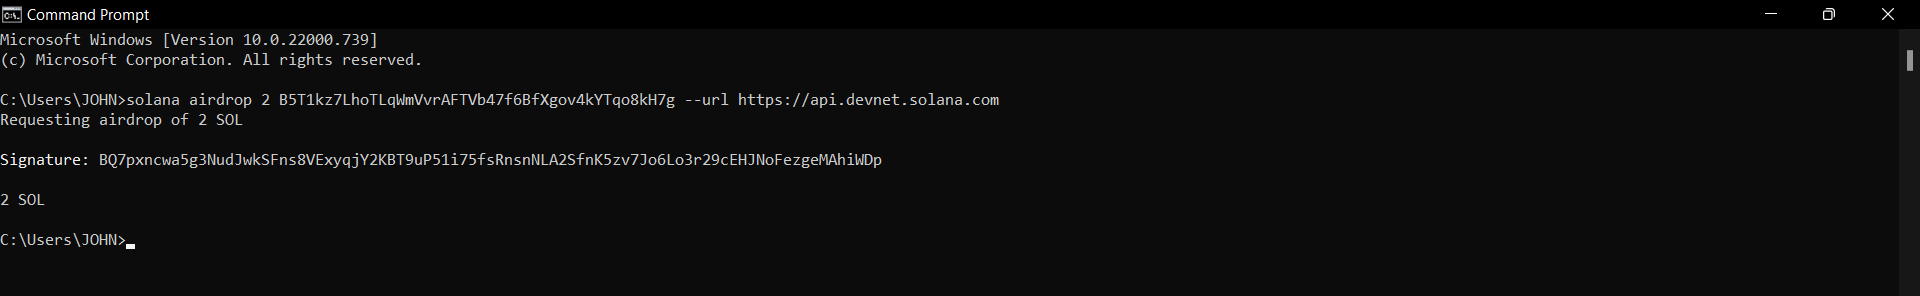 2 Devnet SOL tokens are request from the command line.